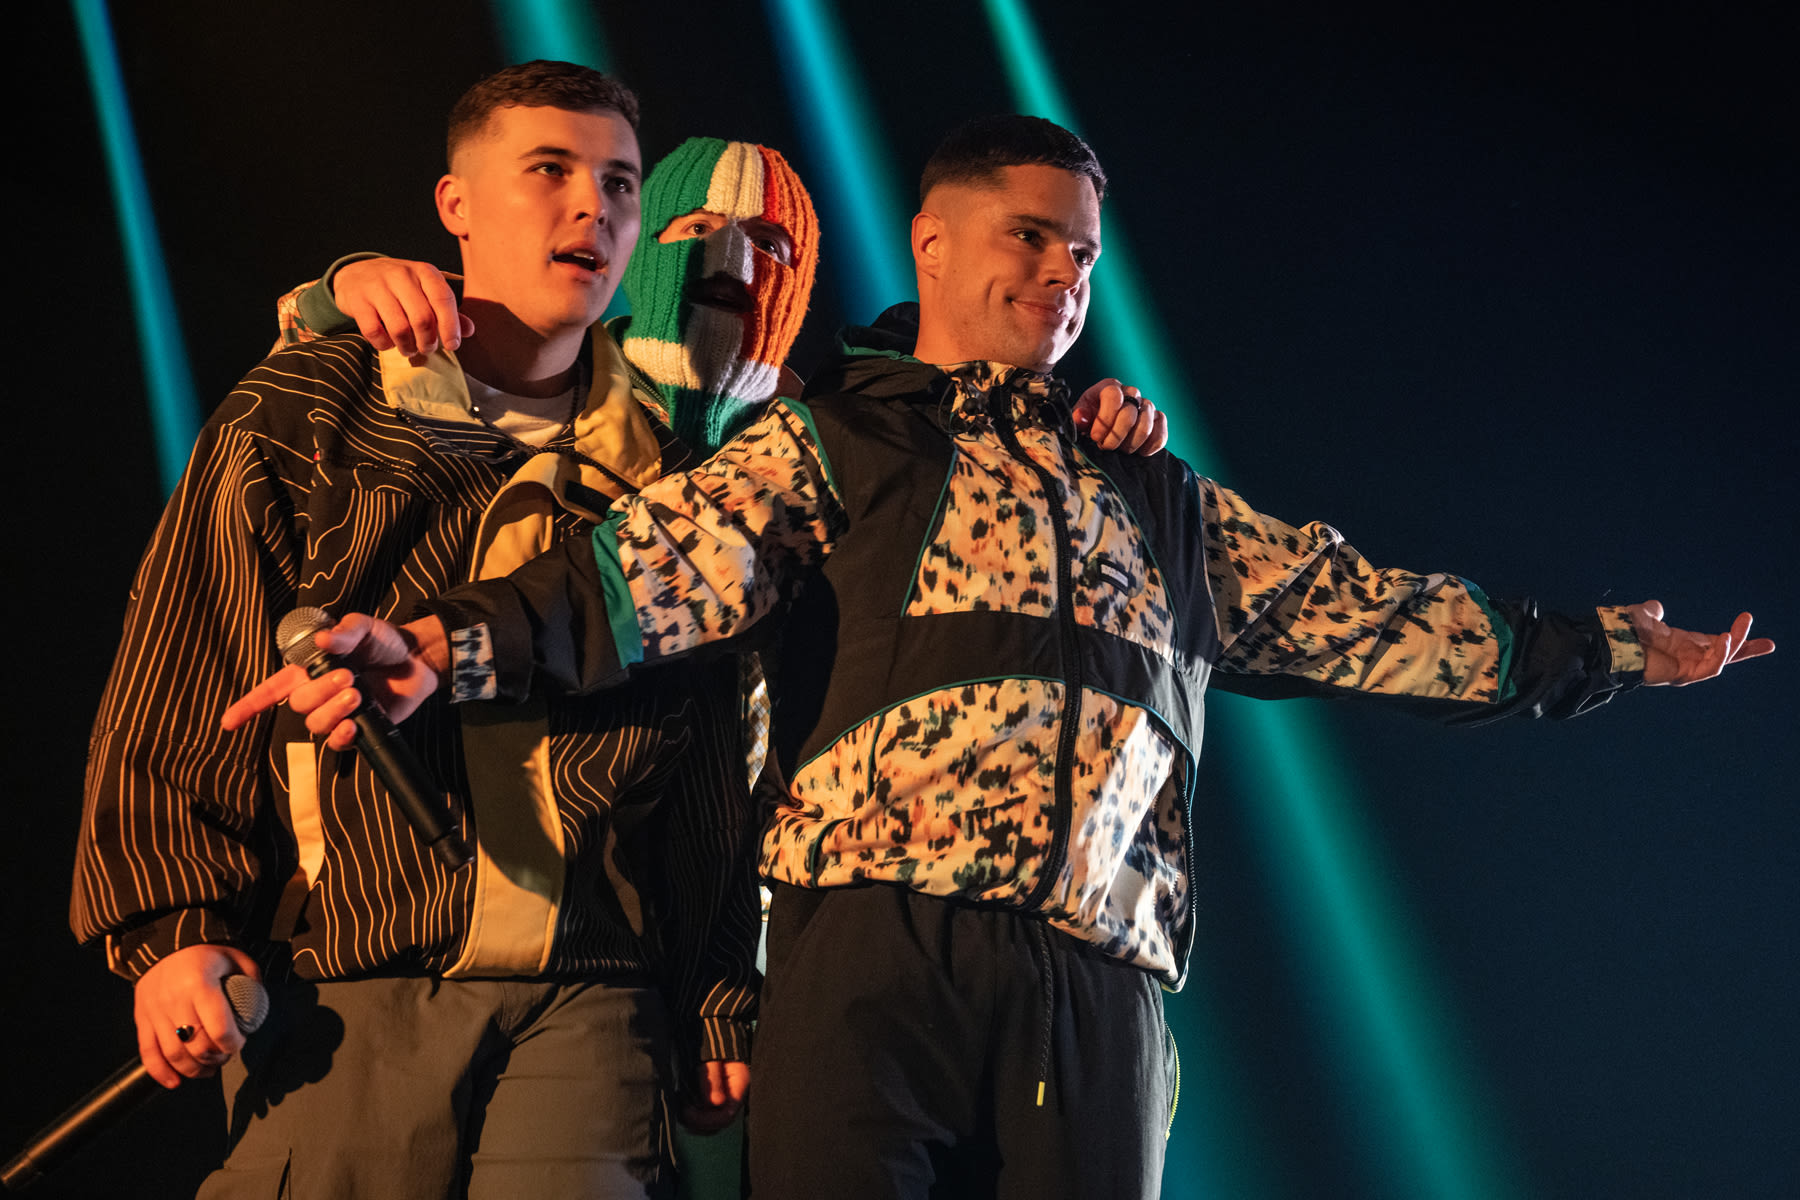 ‘Kneecap’ Gives Belfast’s Controversial Rap Trio Their Own ‘8 Mile’